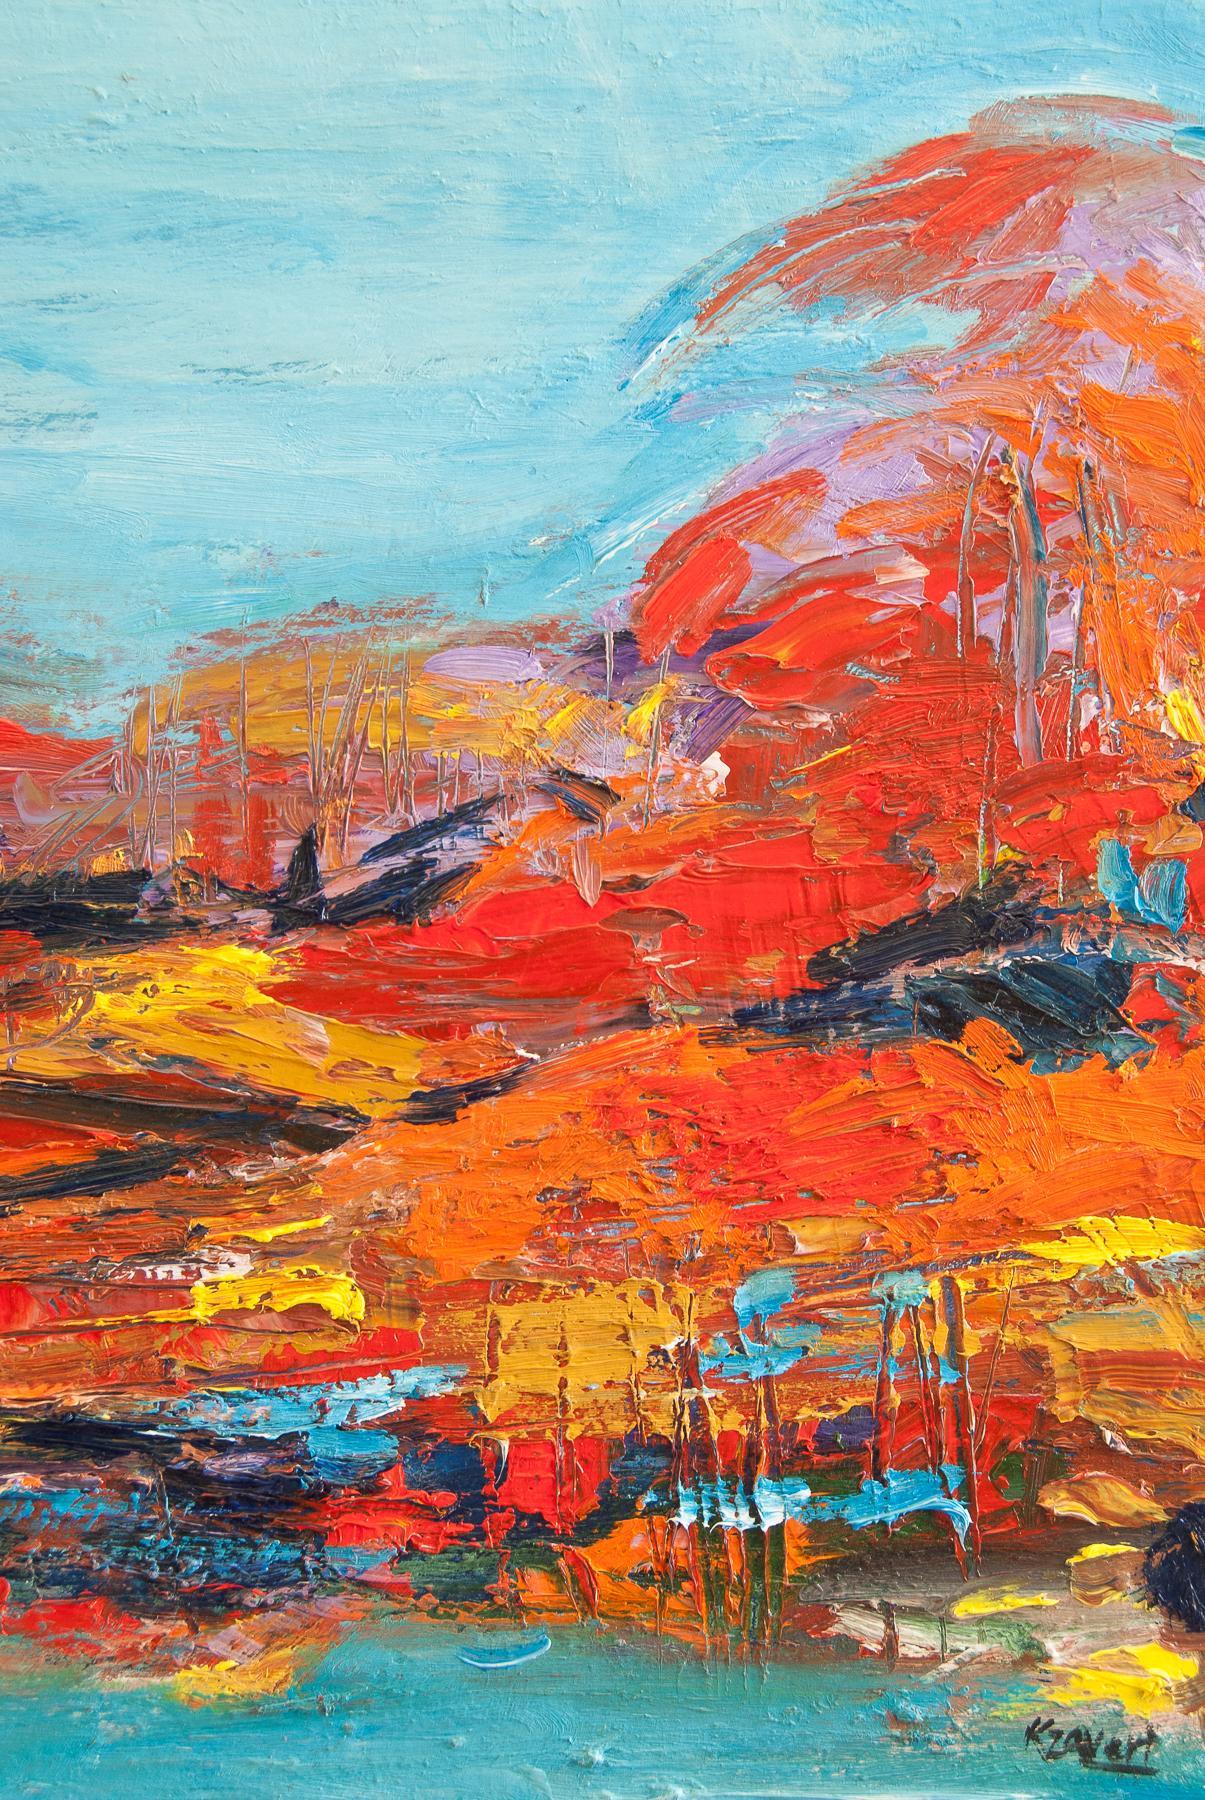 <p>Artist Comments<br>Artist Kajal Zaveri depicts a vibrant abstract landscape inspired by long walks in nature. She paints shades of yellow, orange, and red to create a sharp contrast against the clear blue sky. The cluster of trees bathed in warm